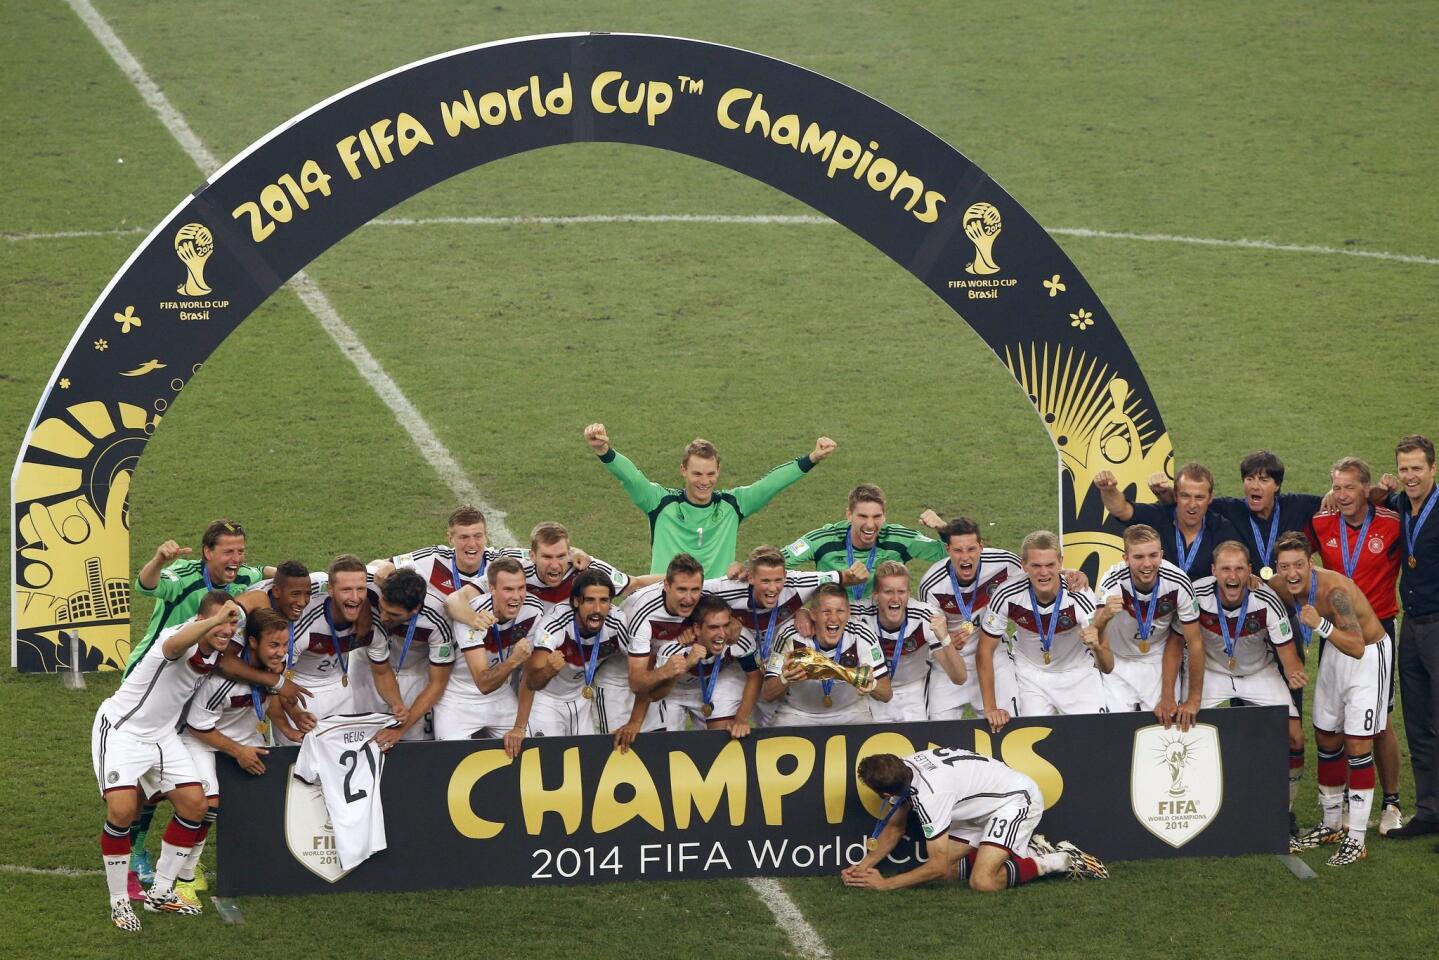 German players pose for the winners' photo after winning the FIFA World Cup 2014 final.